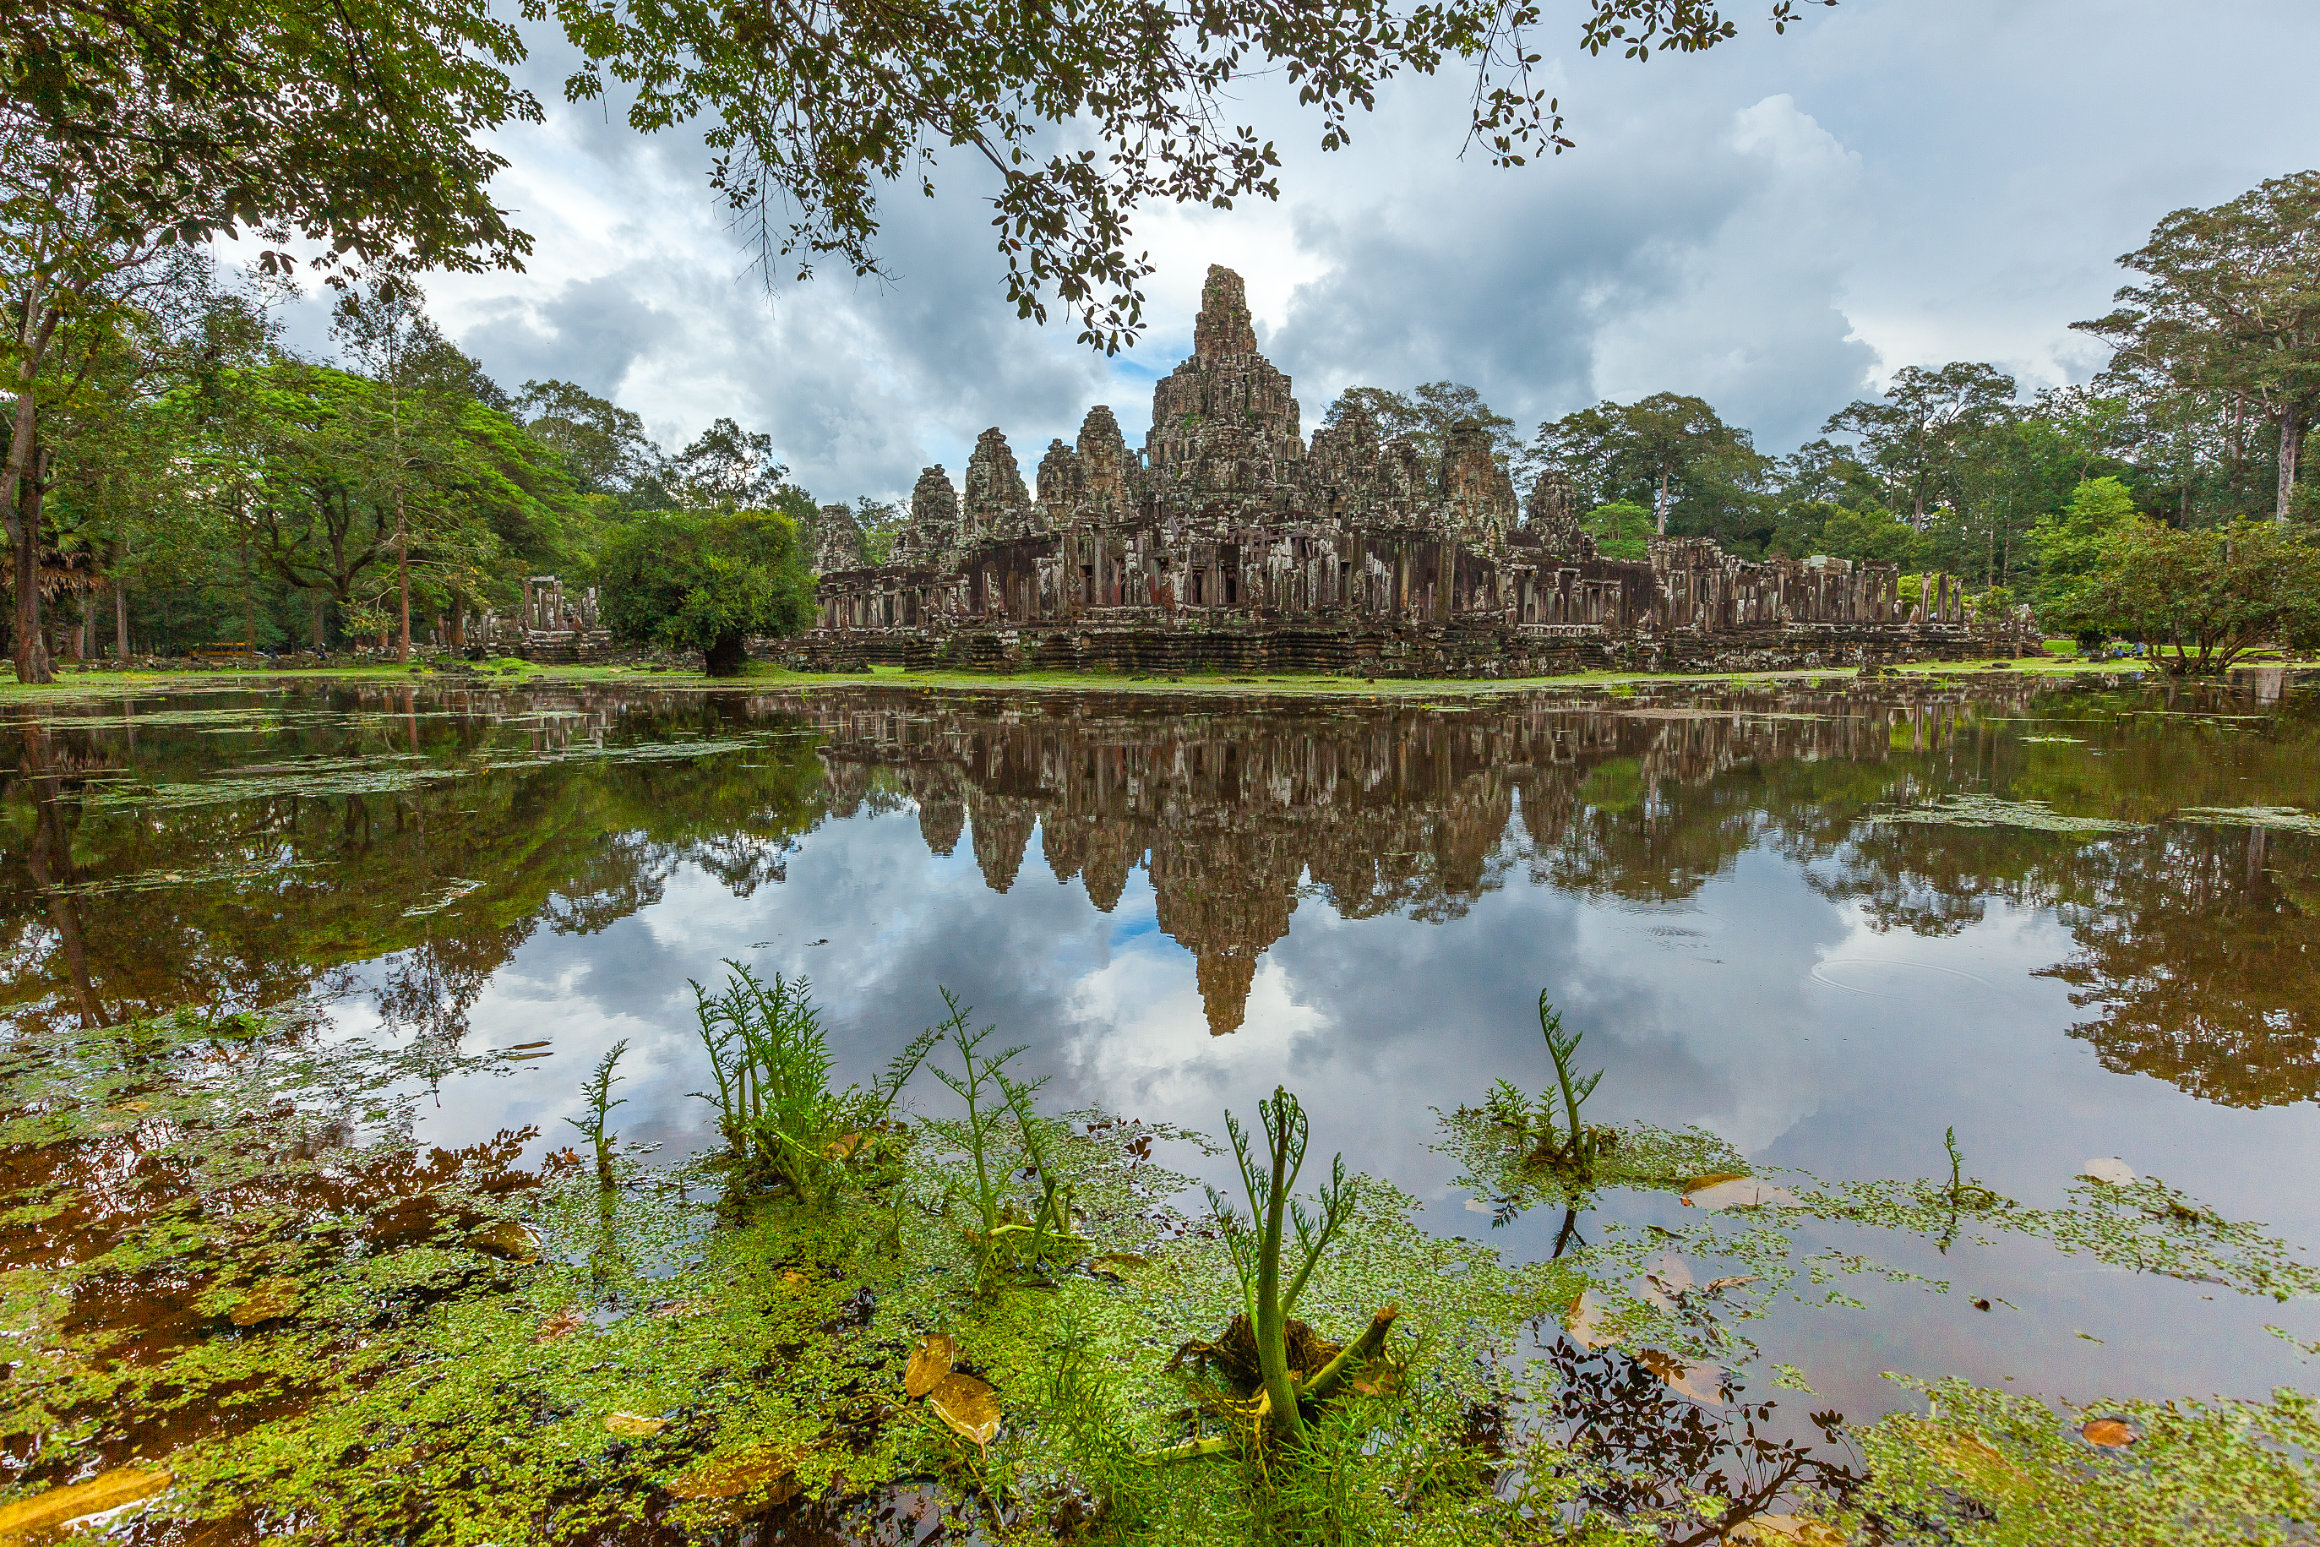 Bayon temple reflection and pond - Siem Reap, Cambodia